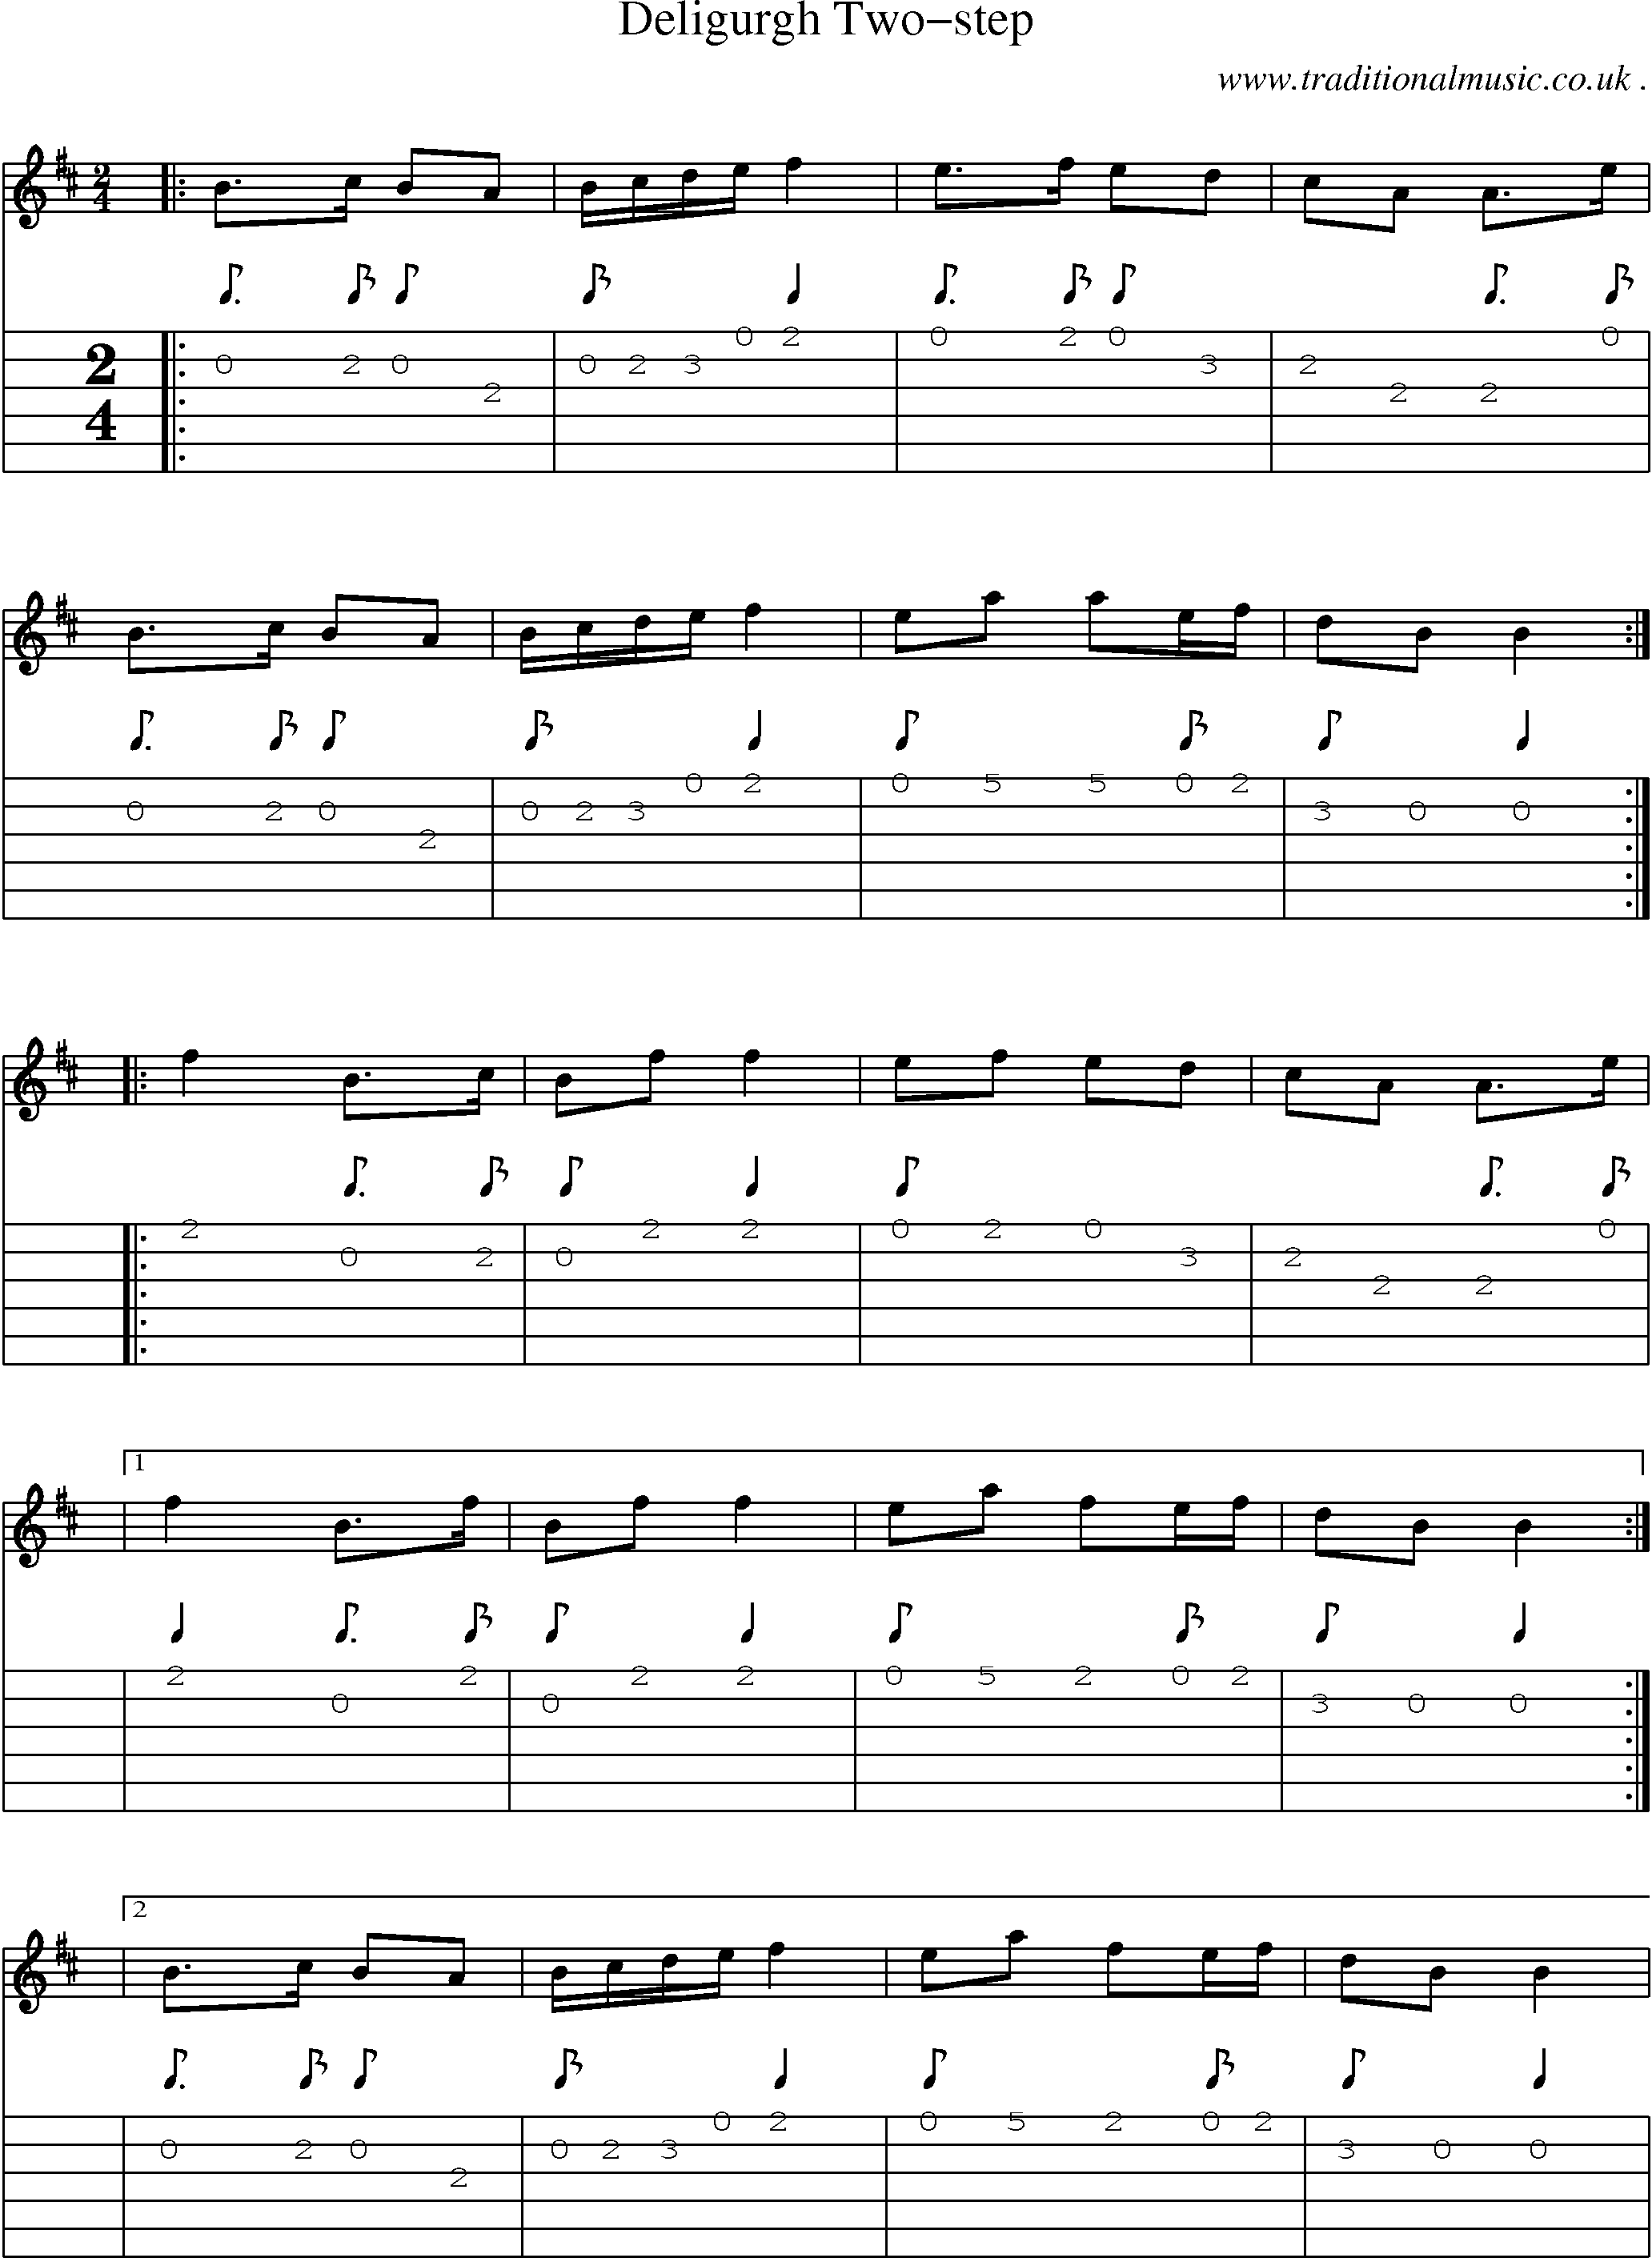 Sheet-Music and Guitar Tabs for Deligurgh Two-step